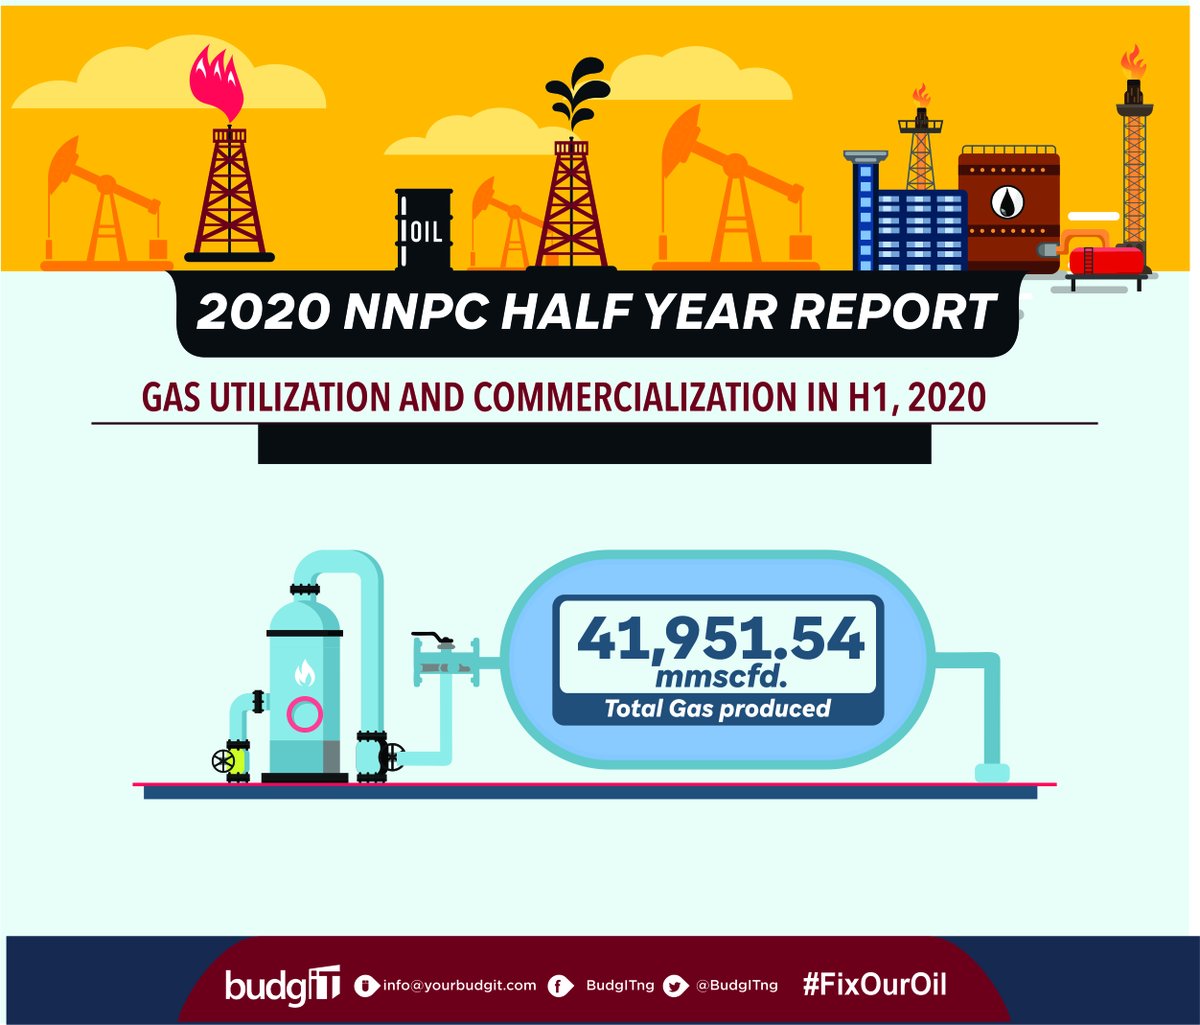 The total volume of gas produced in the same period amounted to 41,951.54 mmscfd, 8.41% of this was flared. #FixOurOil